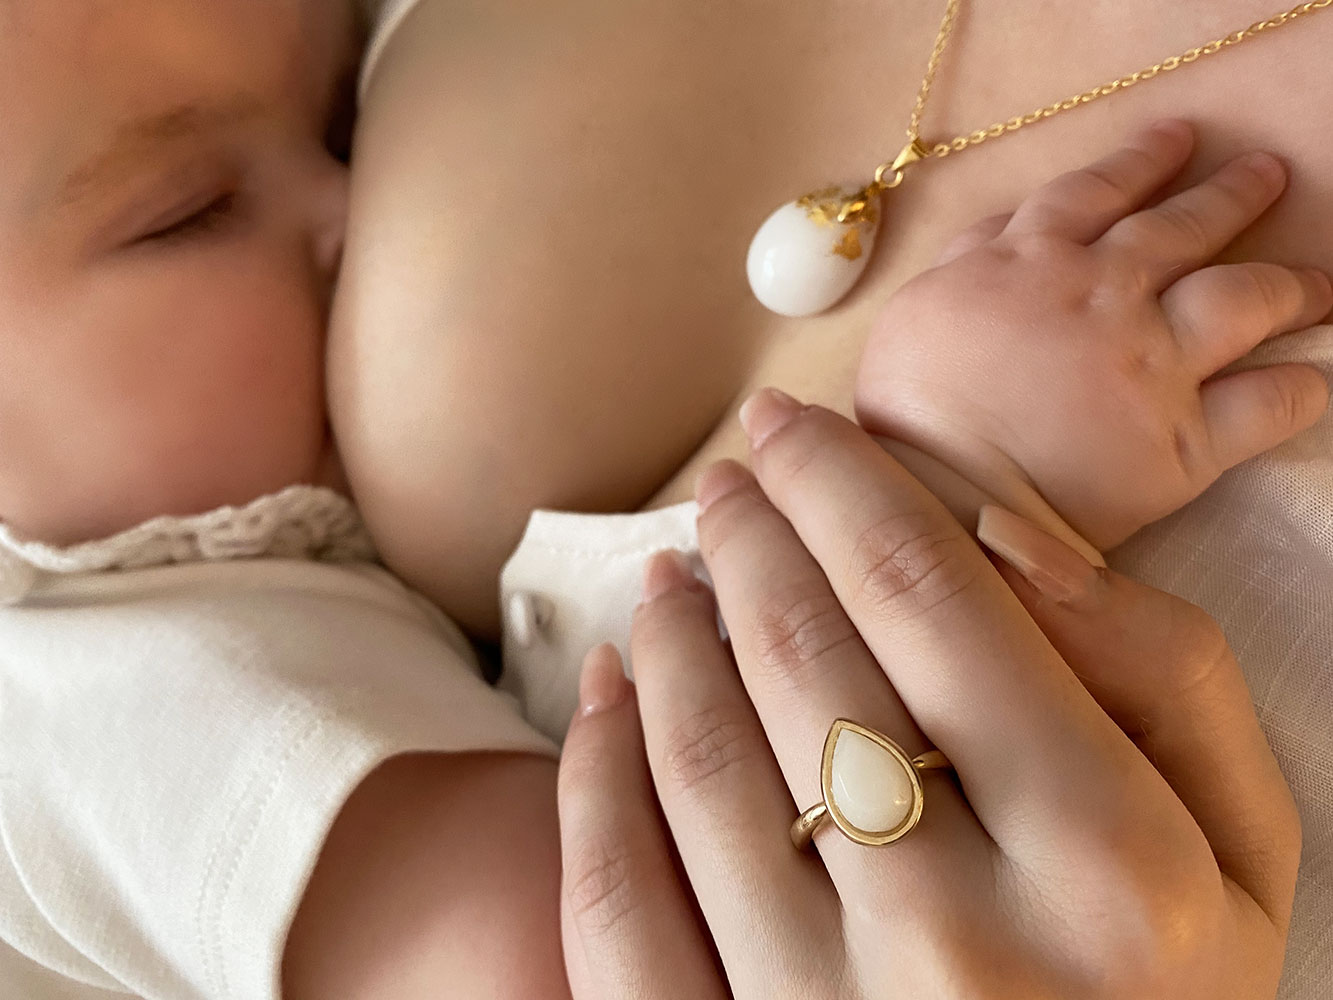 Drop-Shaped Breastmilk Pendant - Unique and Meaningful Jewelry